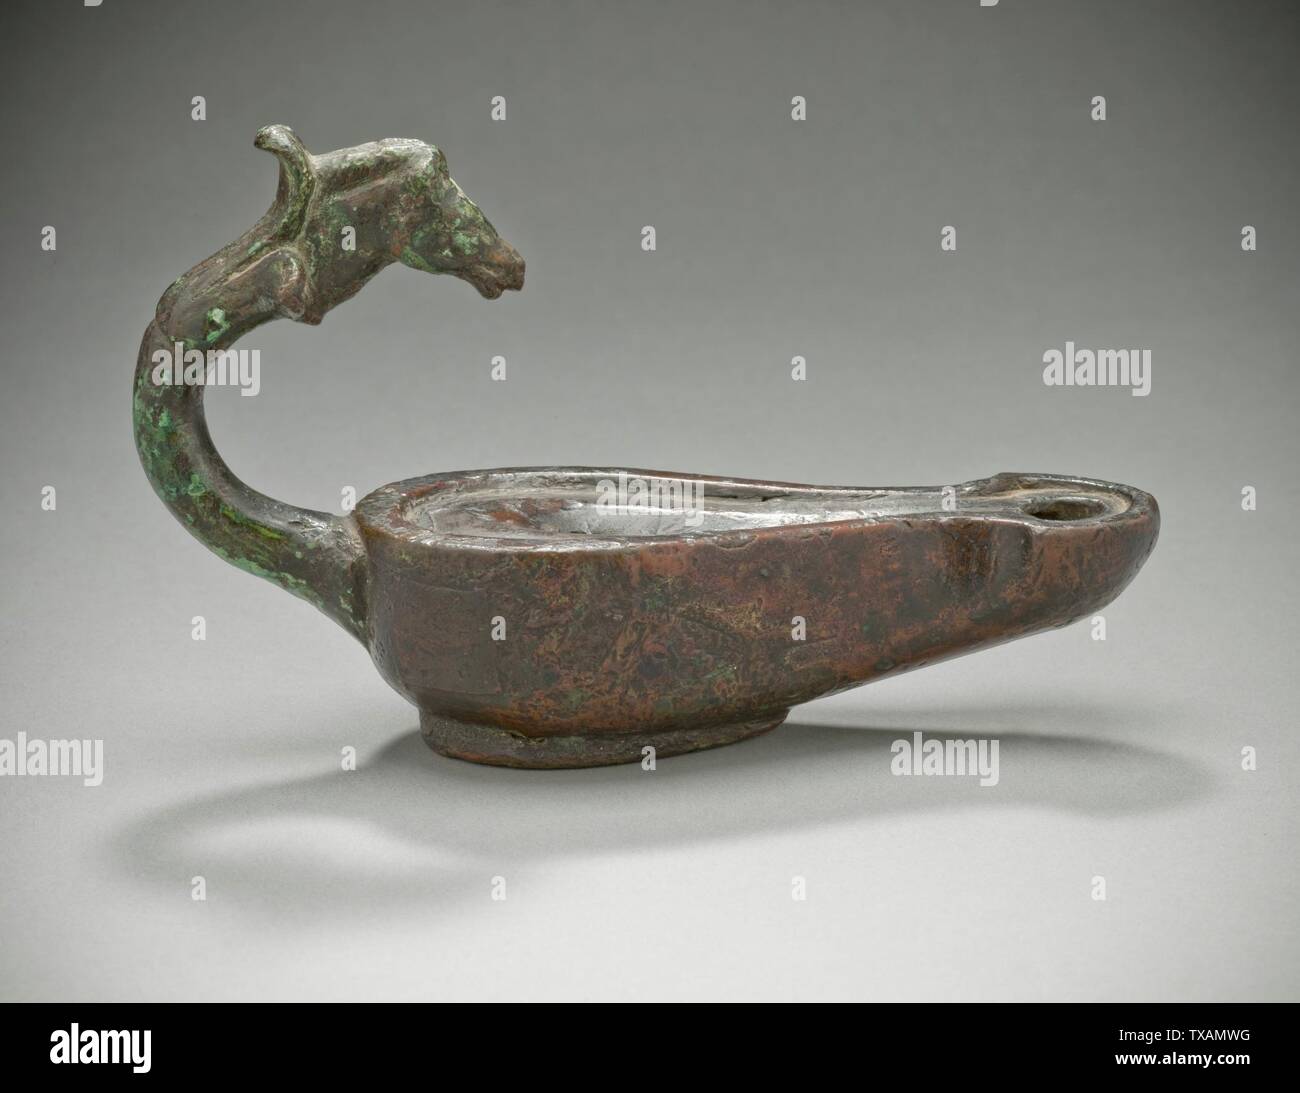 Oil Lamp with Horse's Head;  Roman, 1st-3rd century A.D. Furnishings; Lighting Bronze 3 11/16 x 5 7/8 in. (9.37 x 14.92 cm) Gift of Michael and Linda Keston (M.81.256.6) Greek, Roman and Etruscan Art; 1st-3rd century A.D.; Stock Photo